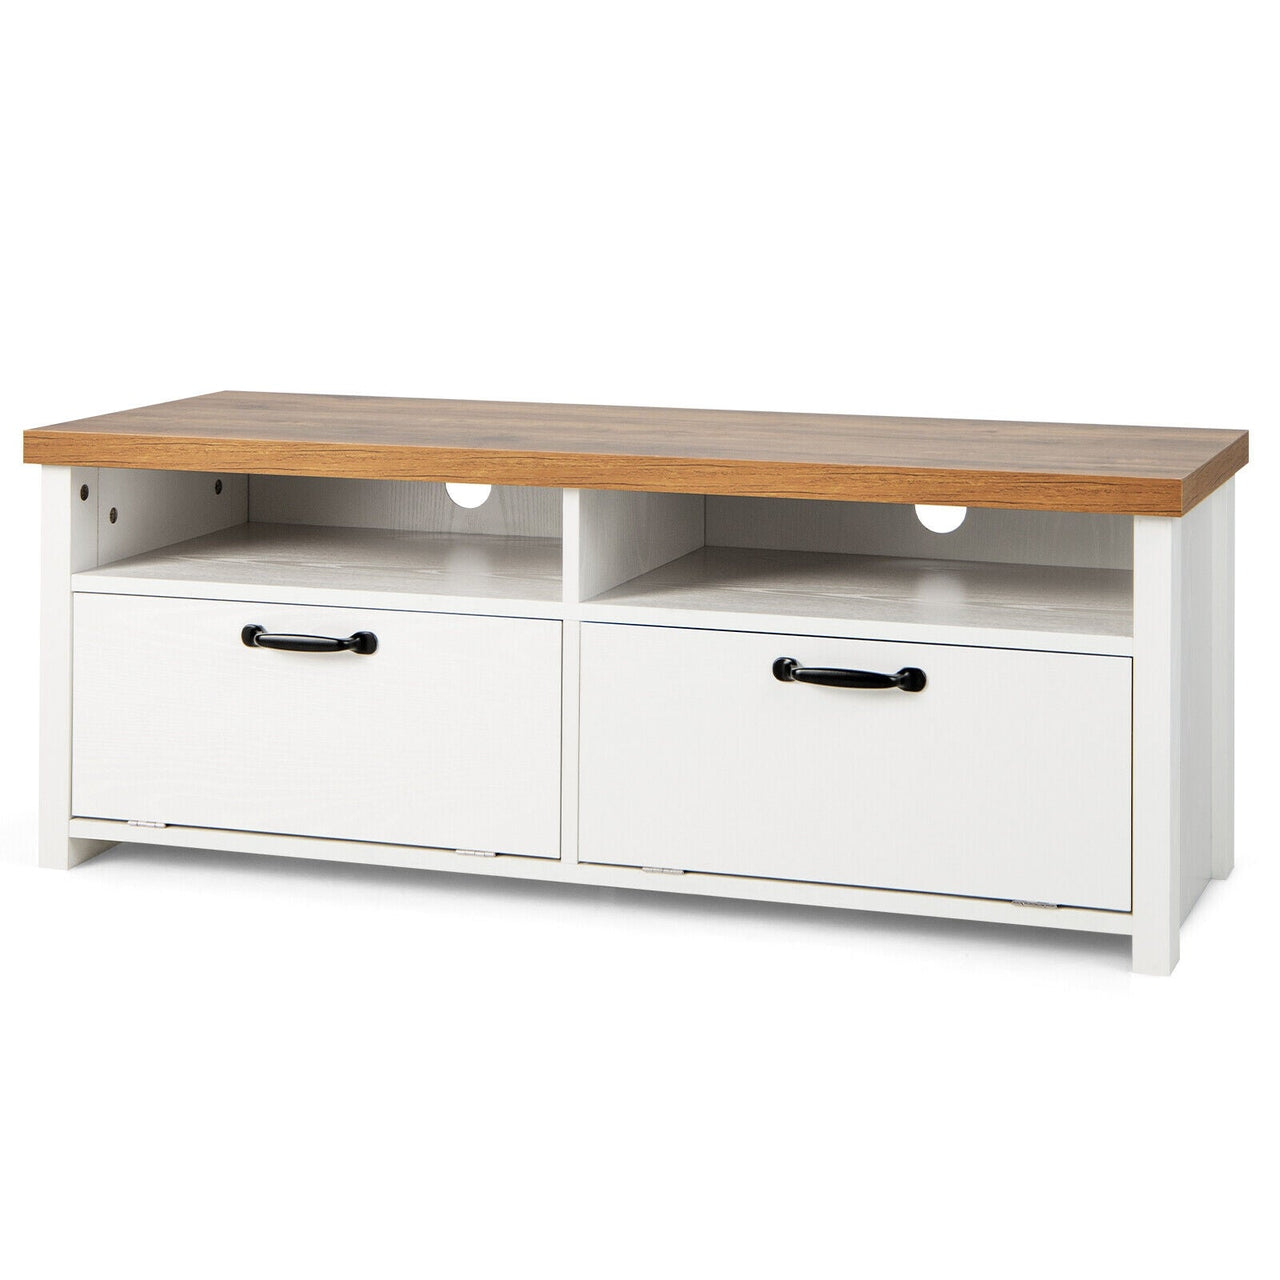 41.5 Inch Modern TV Stand with 2 Cabinets for TVs up to 48 Inch